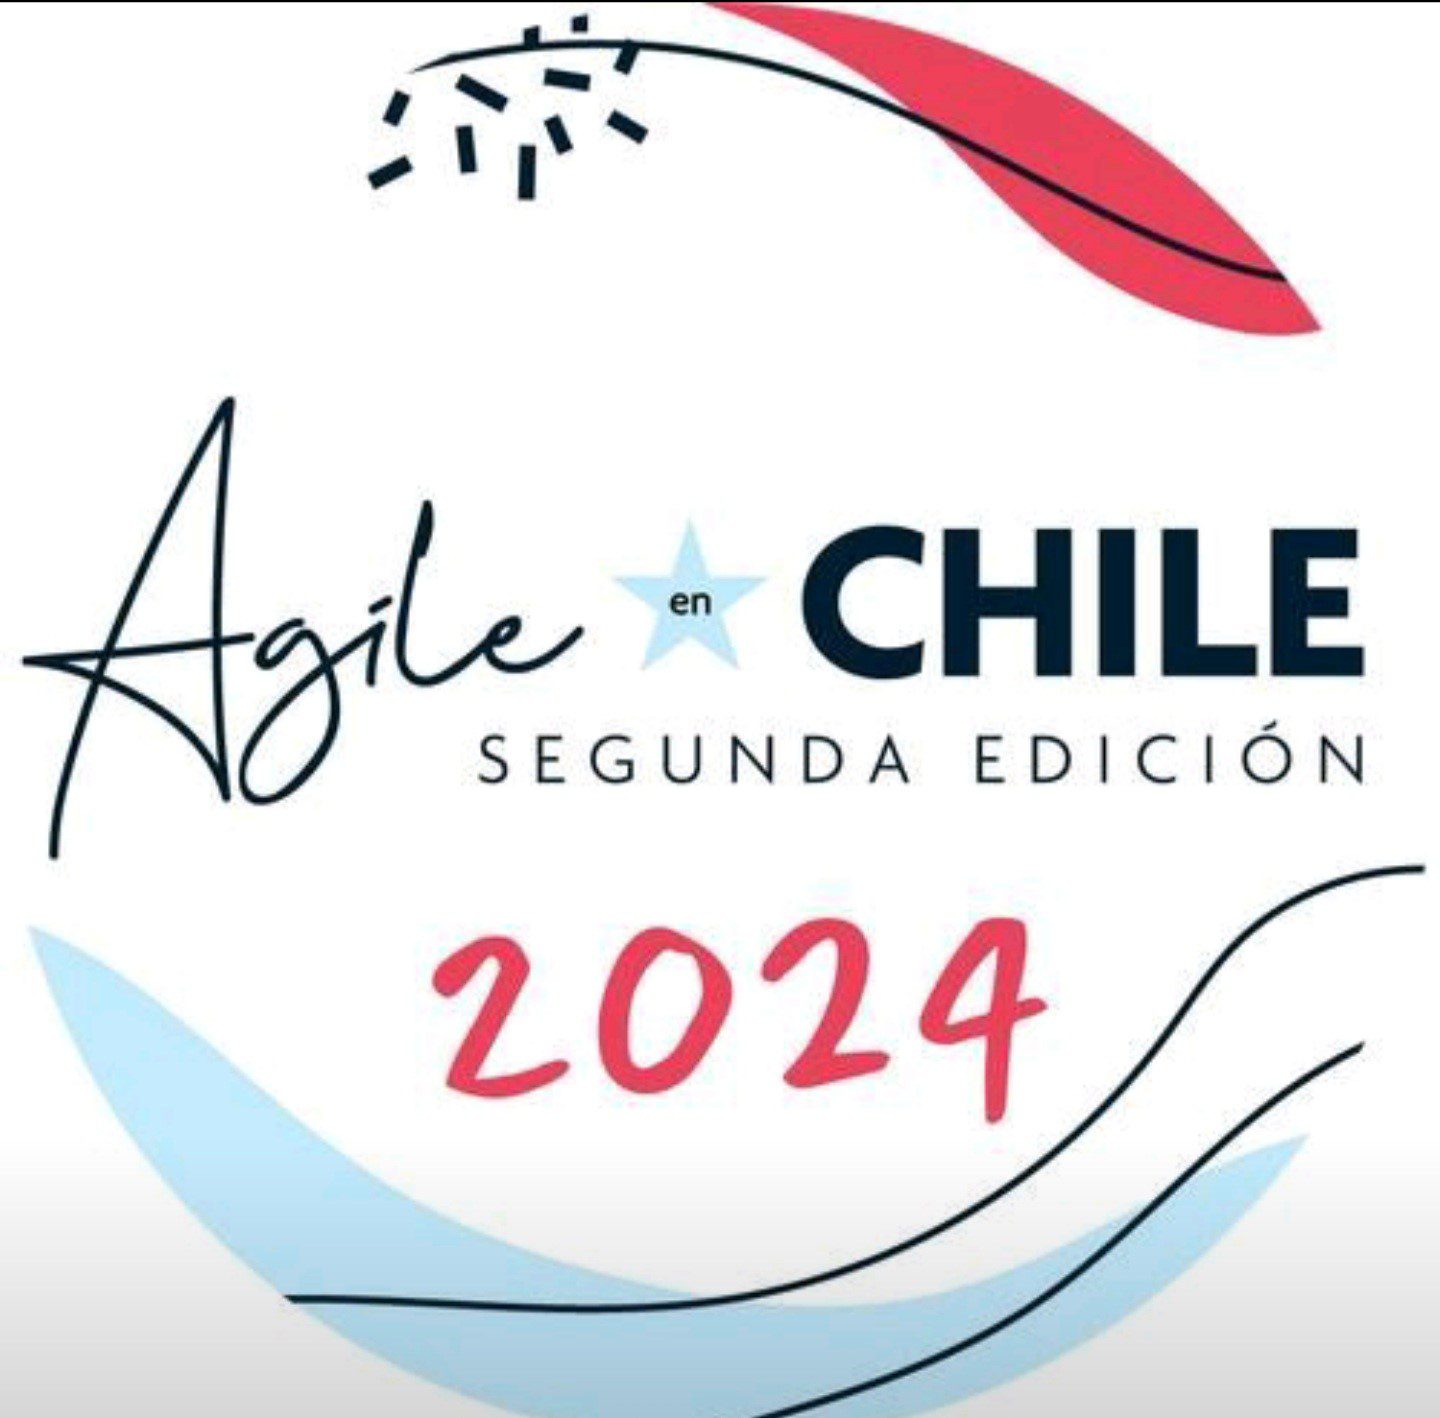 You are currently viewing Agile en Chile 2024 – Santiago